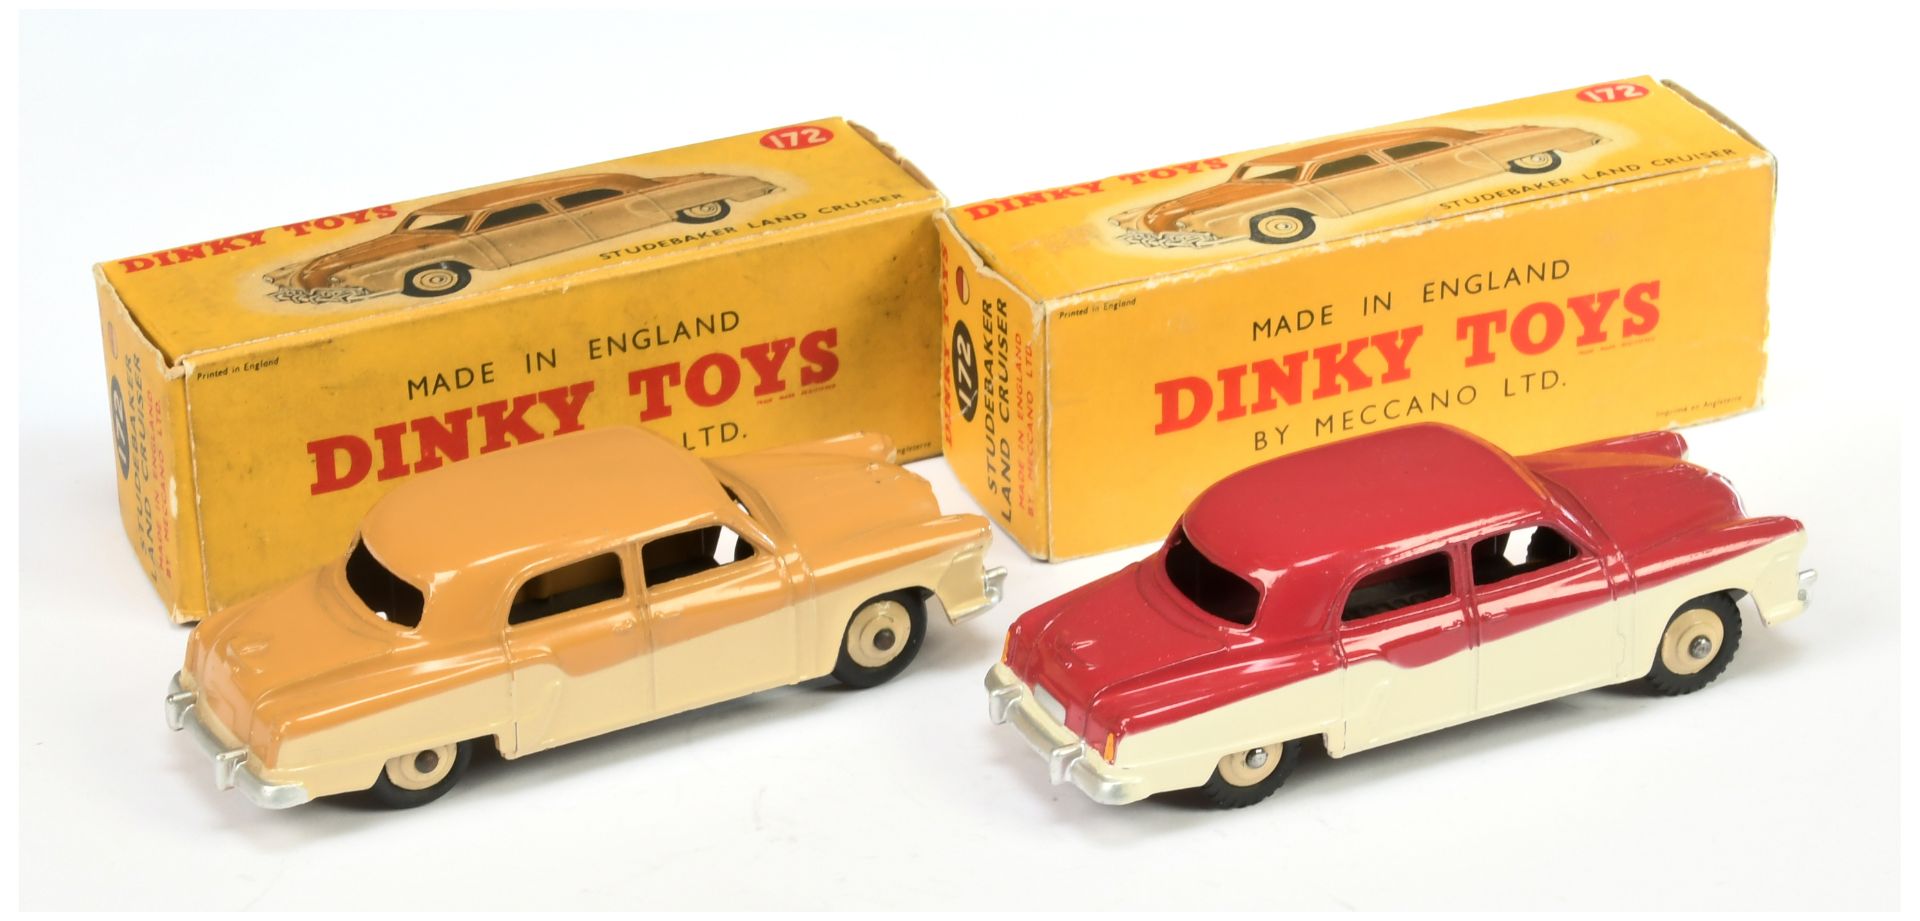 Dinky Toys 172 Studebaker Land Cruiser - Two-Tone Cerise and cream, light beige rigid hubs and si... - Image 2 of 2